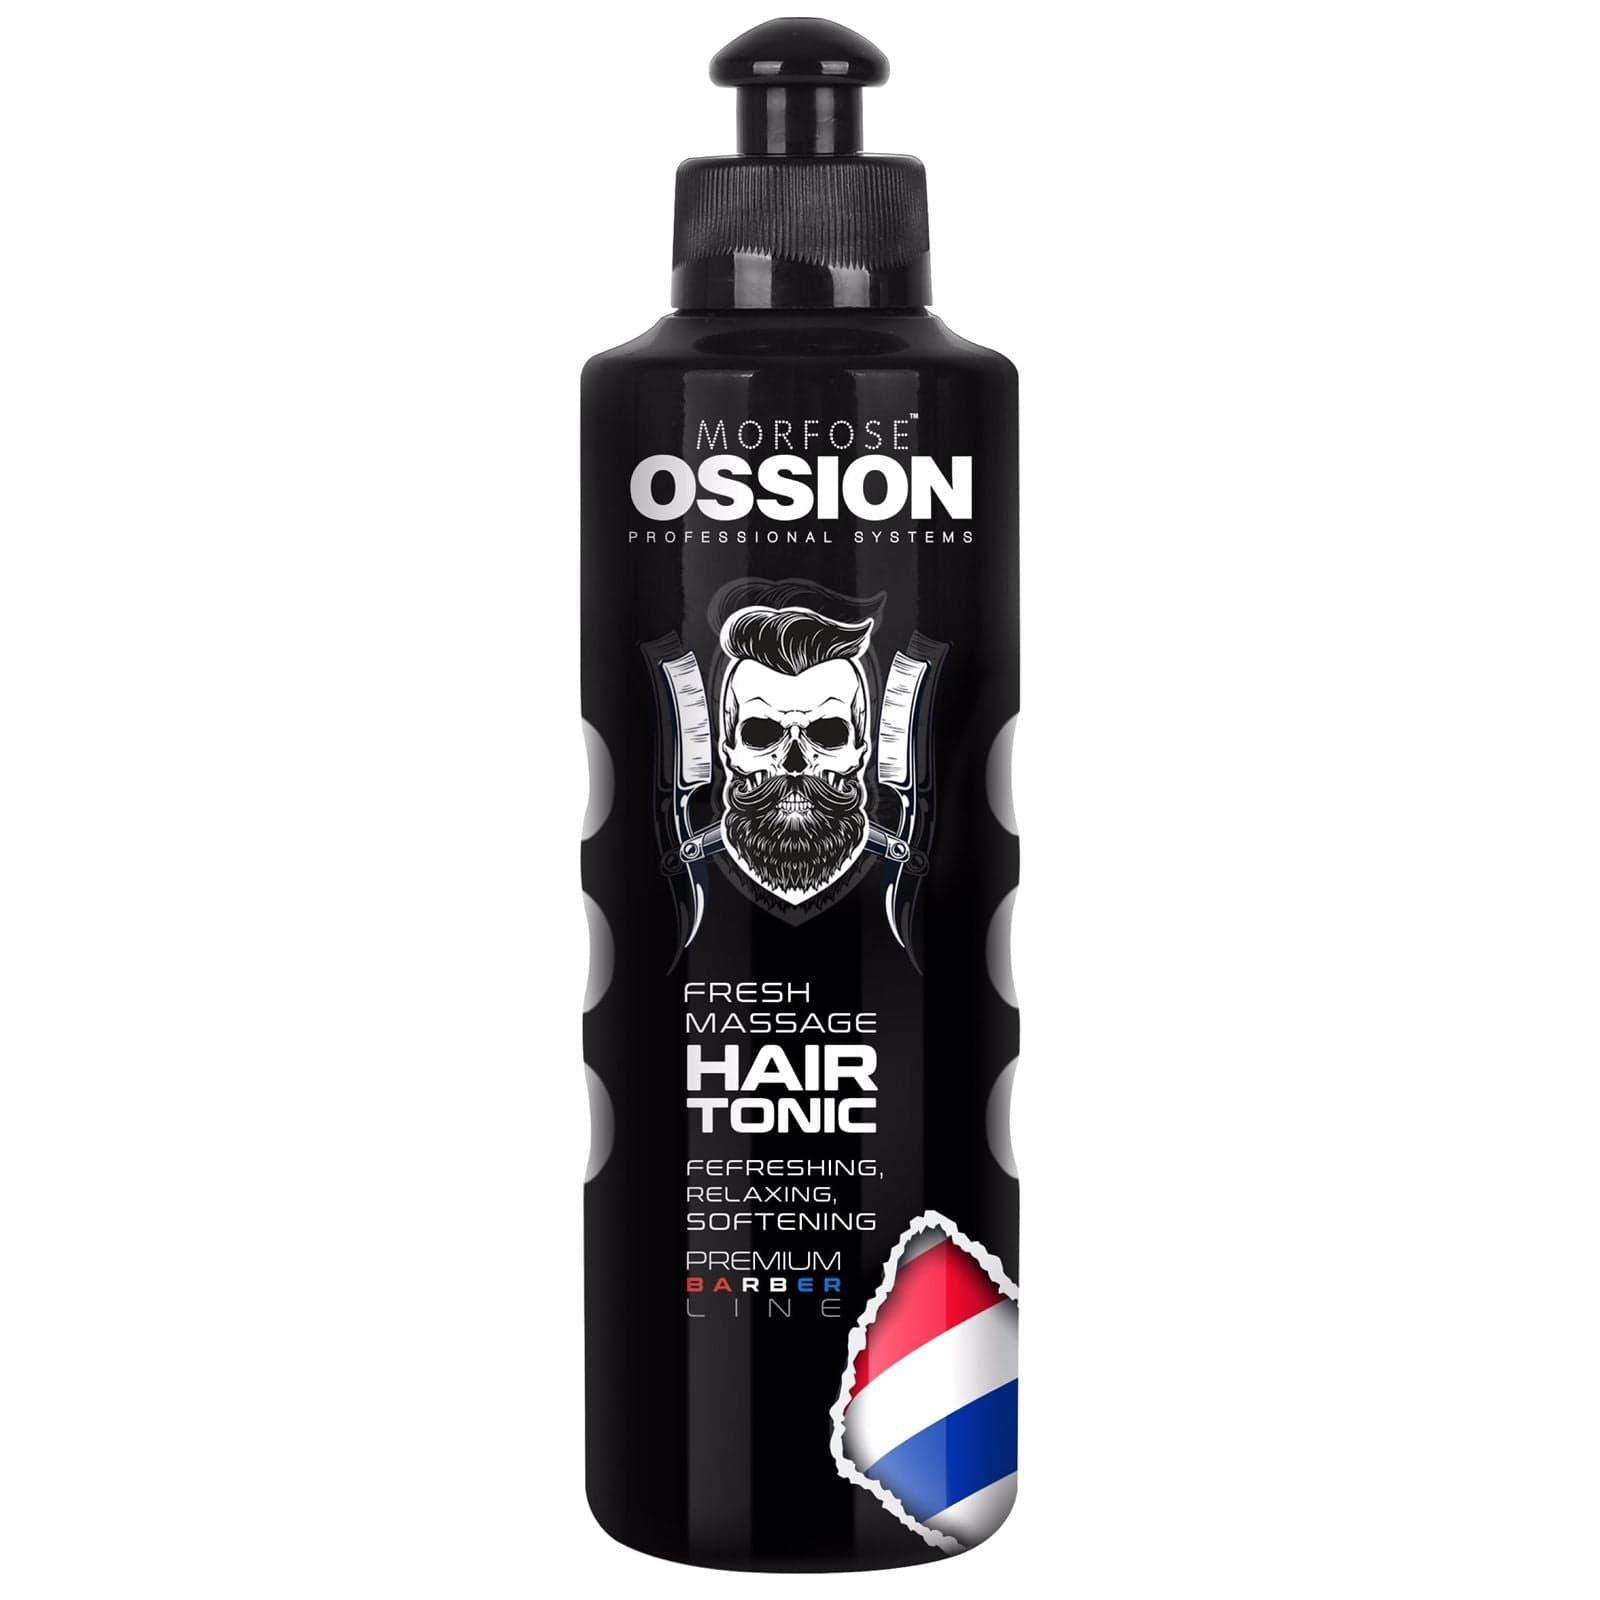 Morfose Ossion Hair Tonic 250ml